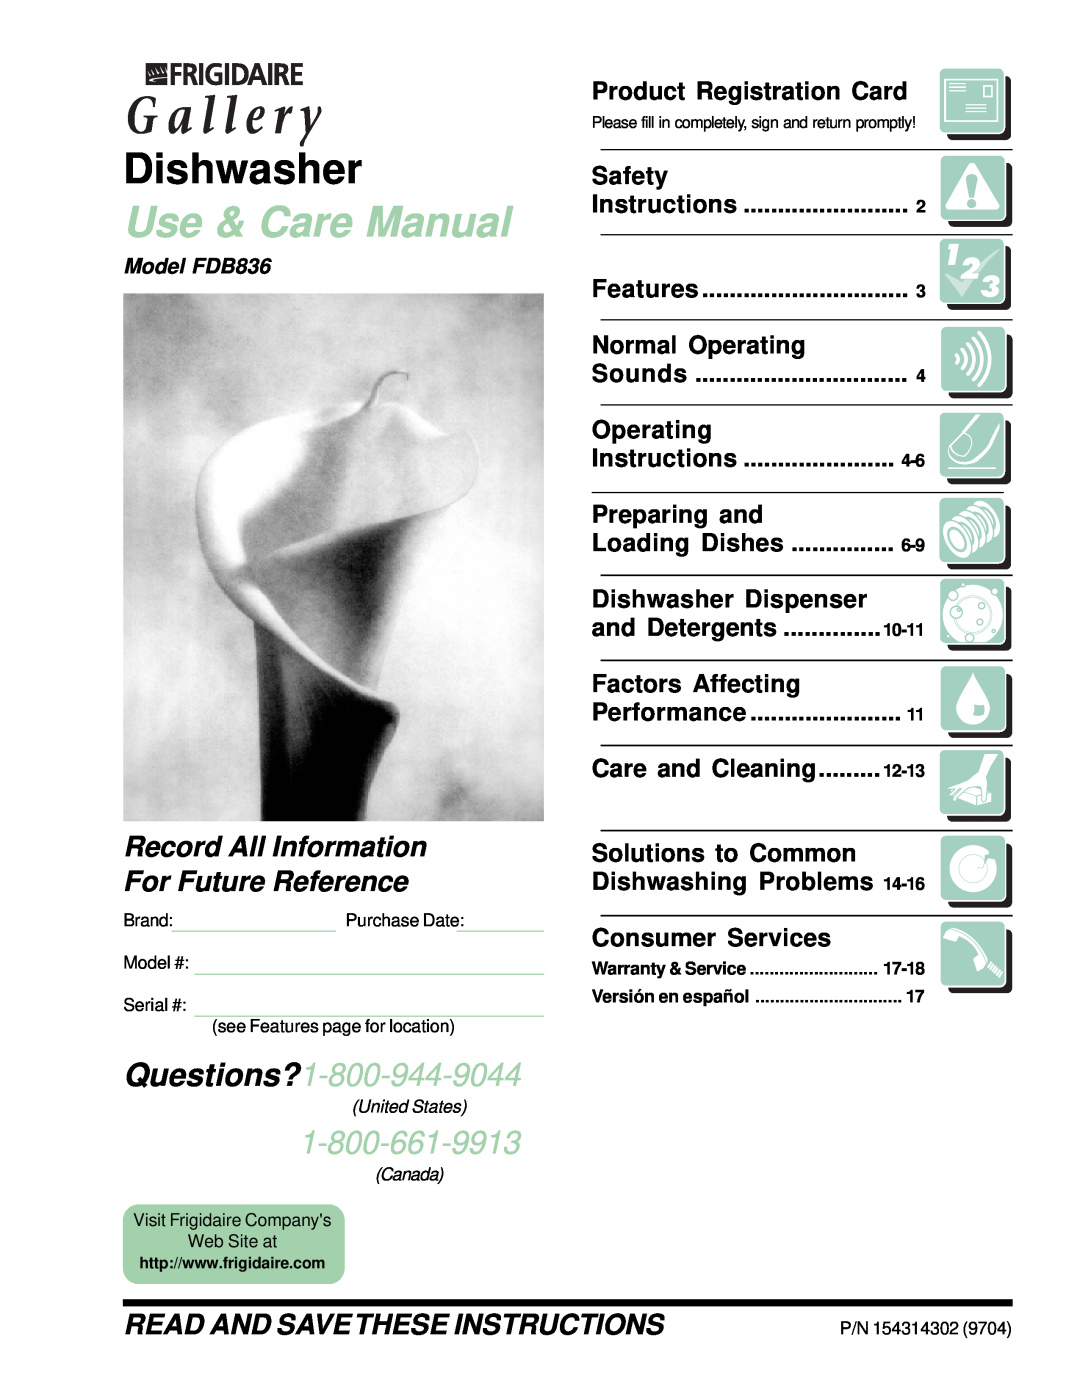 Frigidaire FDB836 manual Dishwasher, Use & Care Manual, Questions?1-800-944-9044, Read And Save These Instructions 